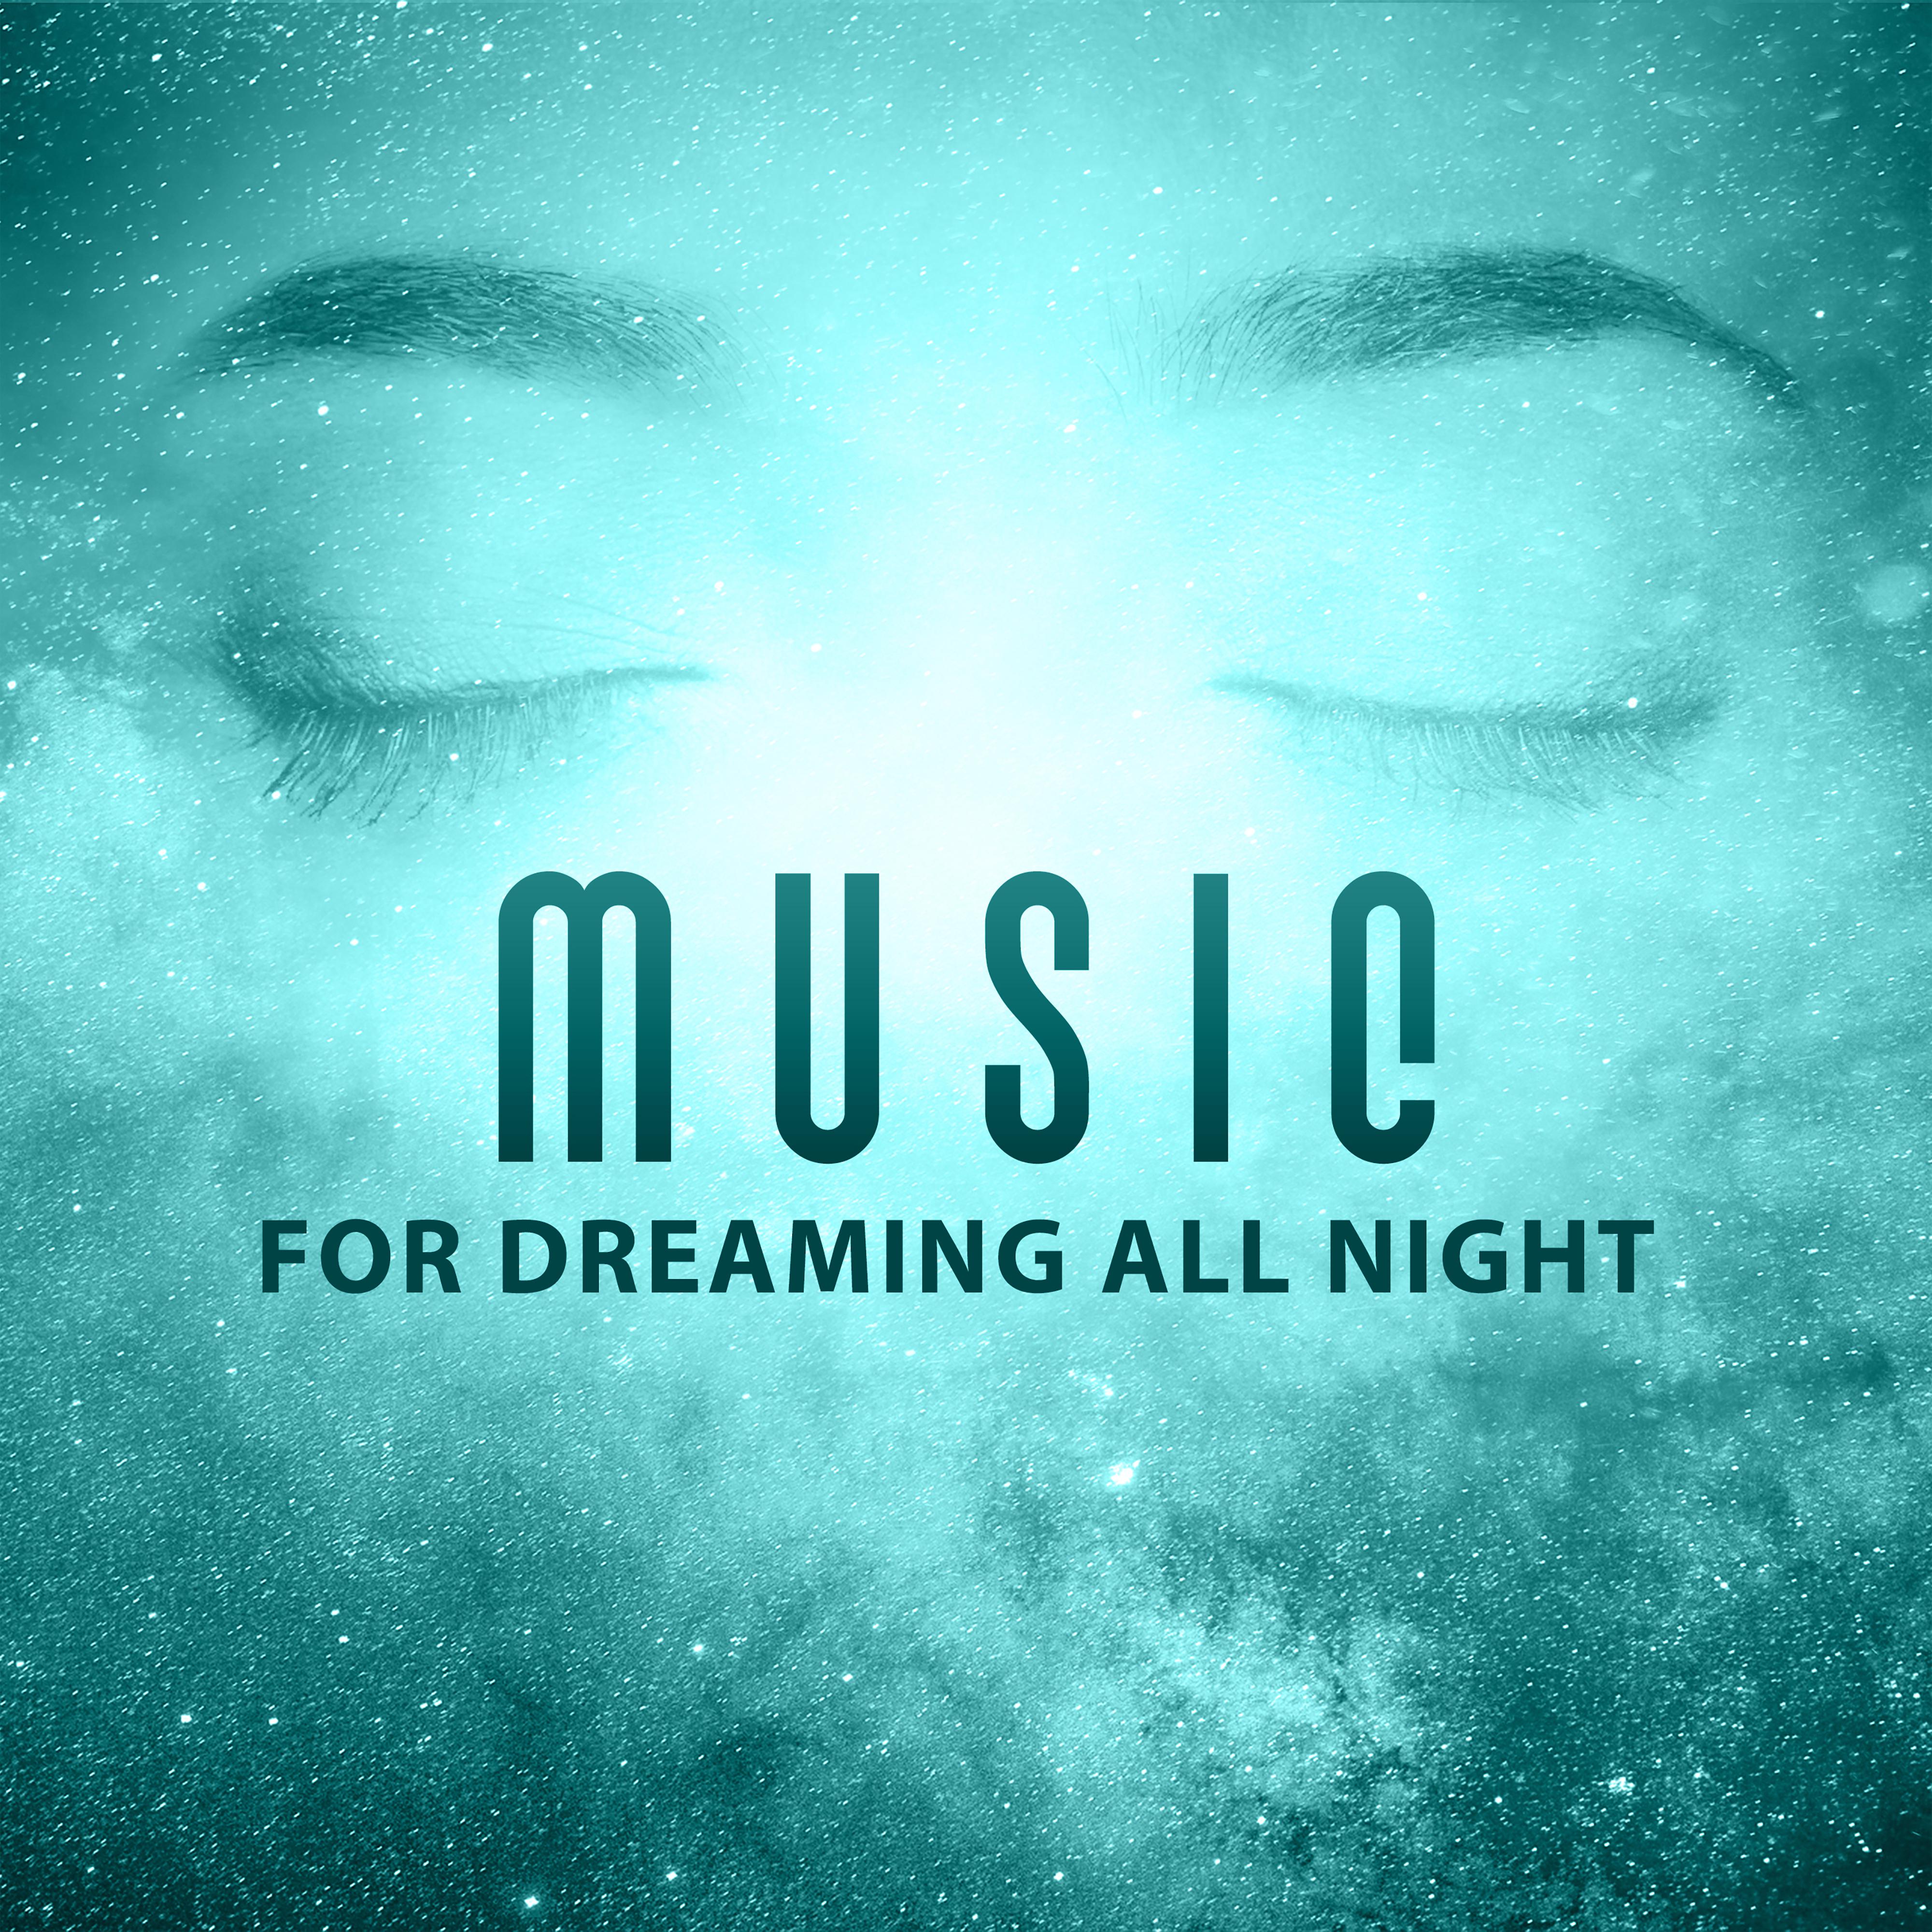 Music for Dreaming All Night  Stress Relief, New Age Relaxation, Soothing Sounds, Music to Rest  Relax